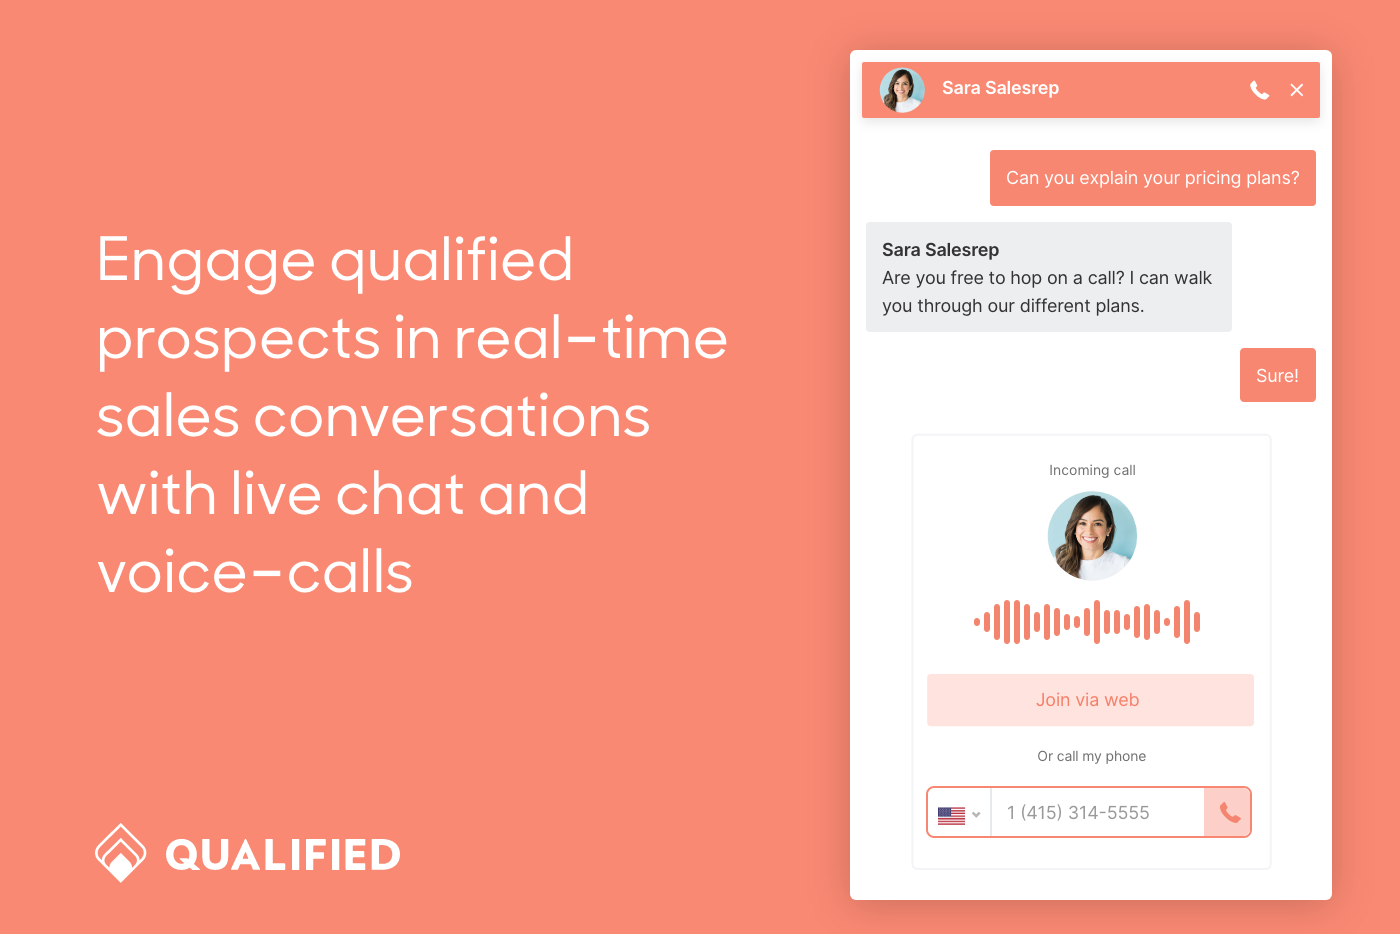 Engage qualified prospects in real-time, high-fidelity sales conversations with live chat and voice calls.